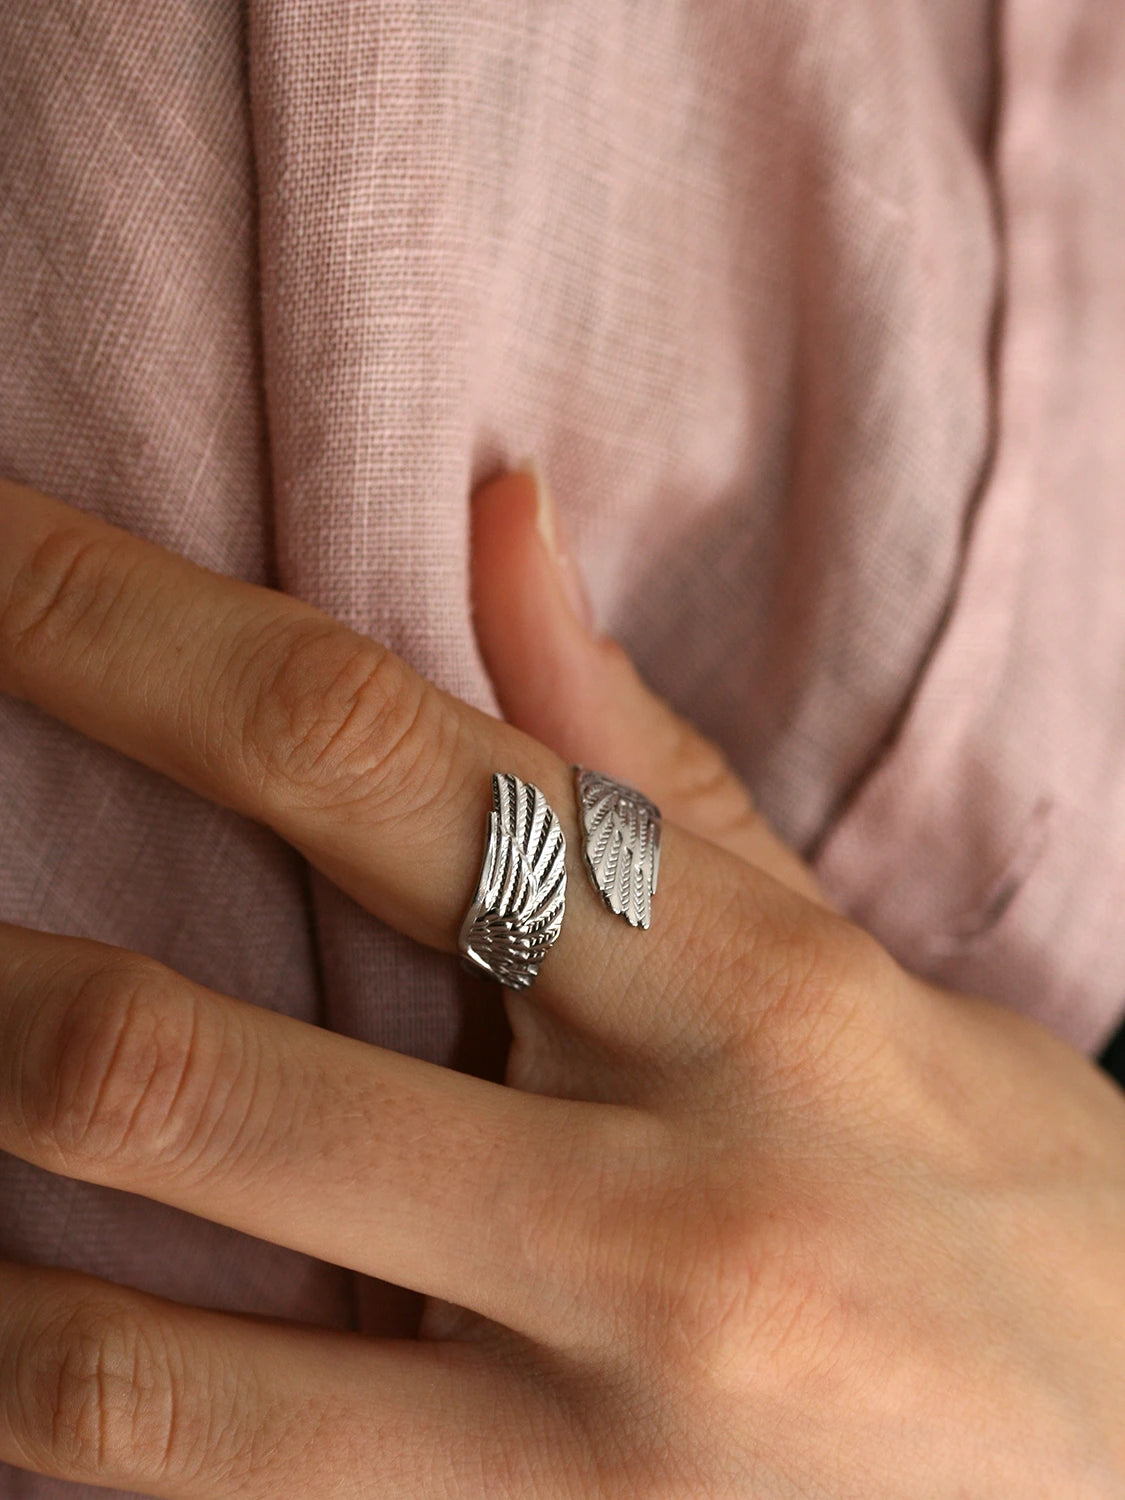 Silver Fly ring